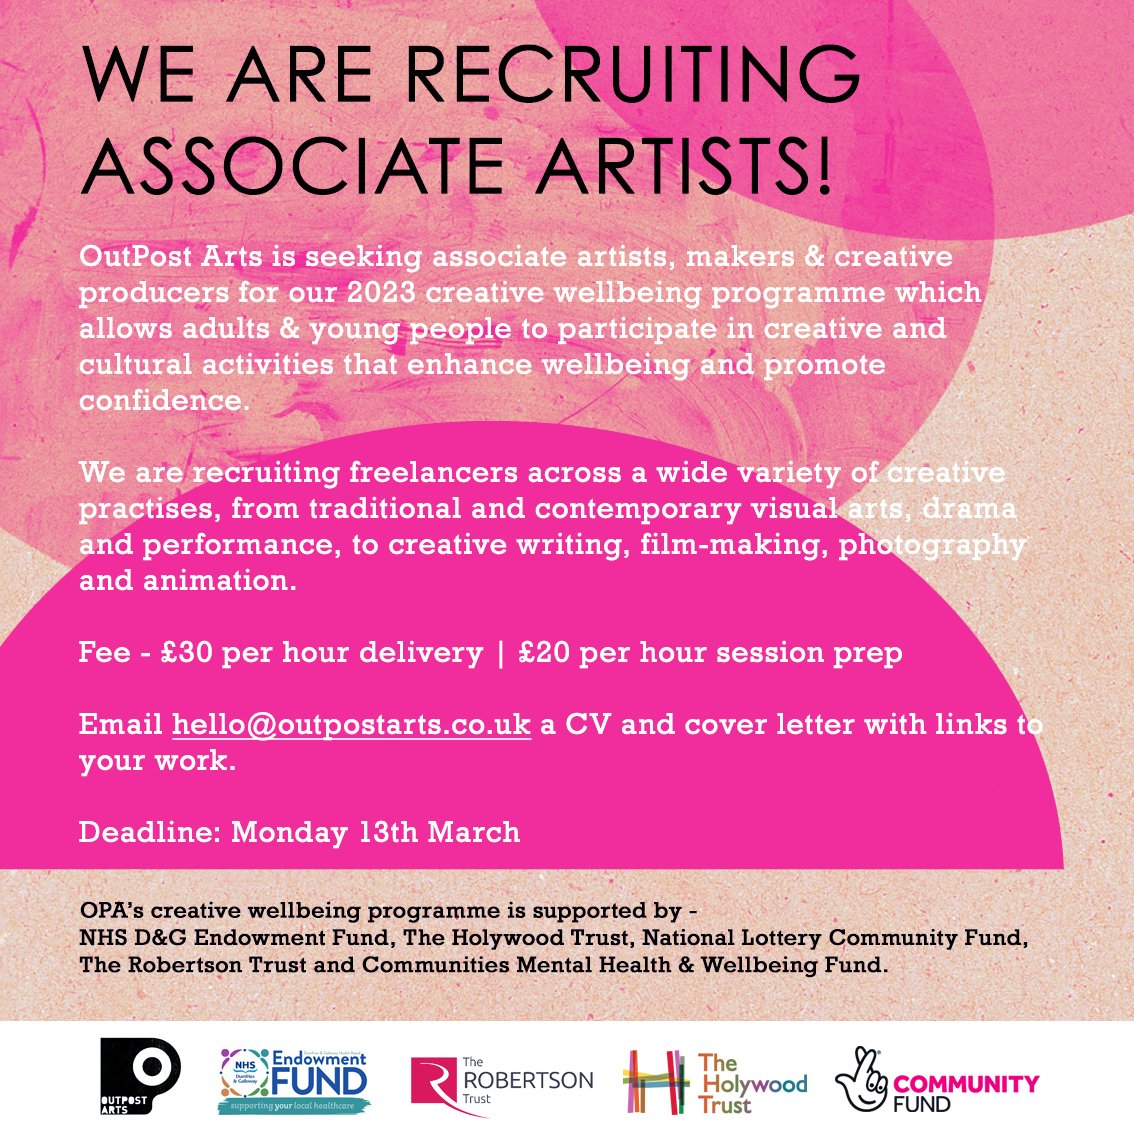 WE'RE RECRUITING!! OPA is seeking associate artists, makers & creative producers for our 2023 creative wellbeing programme which allows adults & young people to participate in creative/cultural activities that enhance wellbeing and promote confidence. 👉hello@outpostarts.co.uk